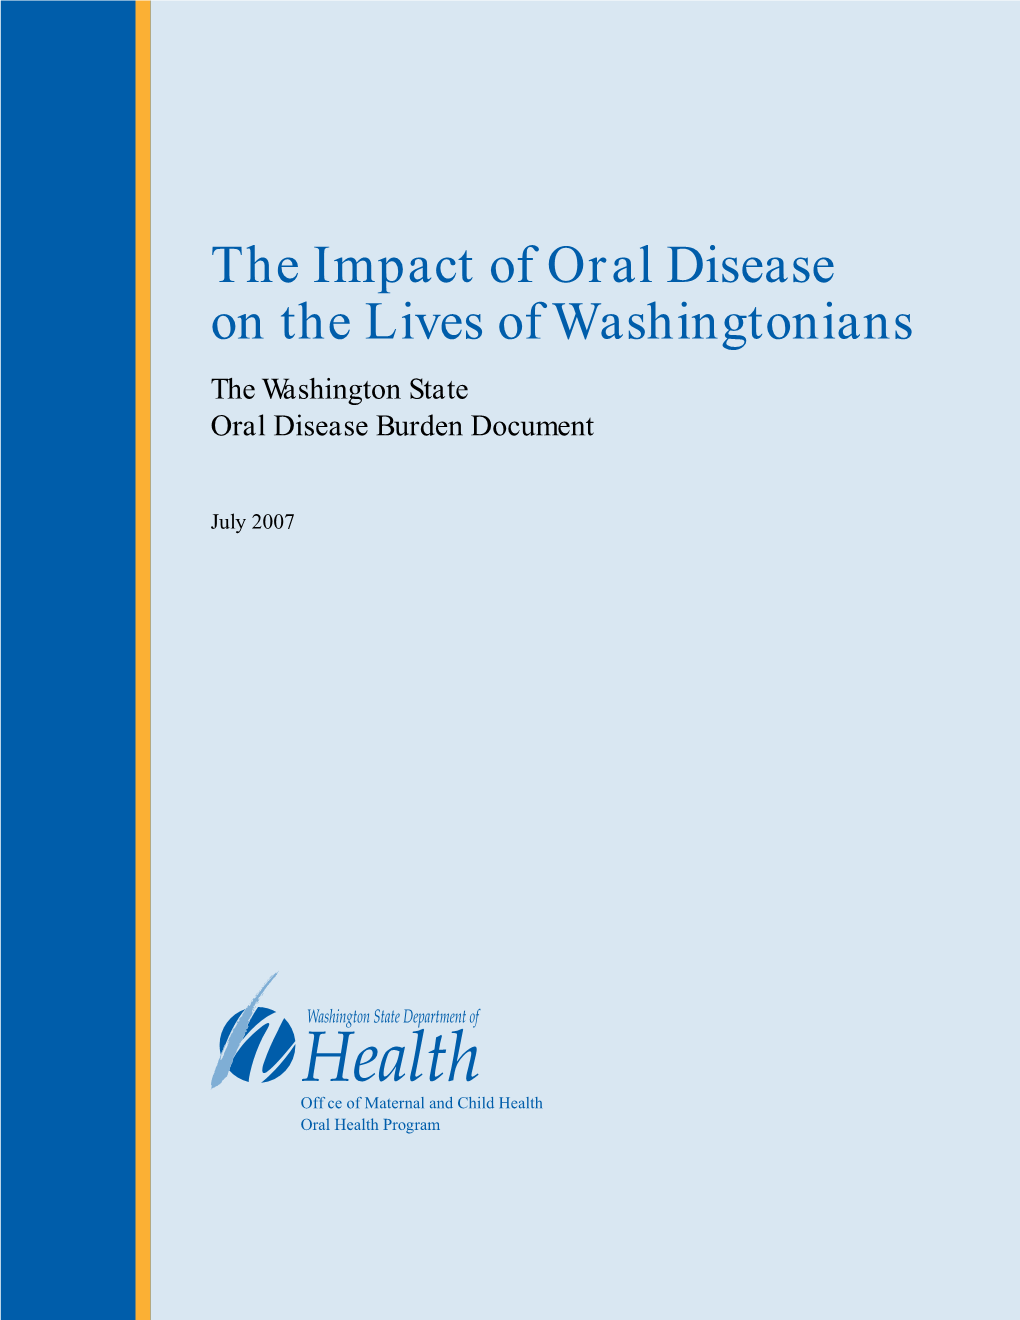 The Impact of Oral Disease on the Lives of Washingtonians the Washington State Oral Disease Burden Document